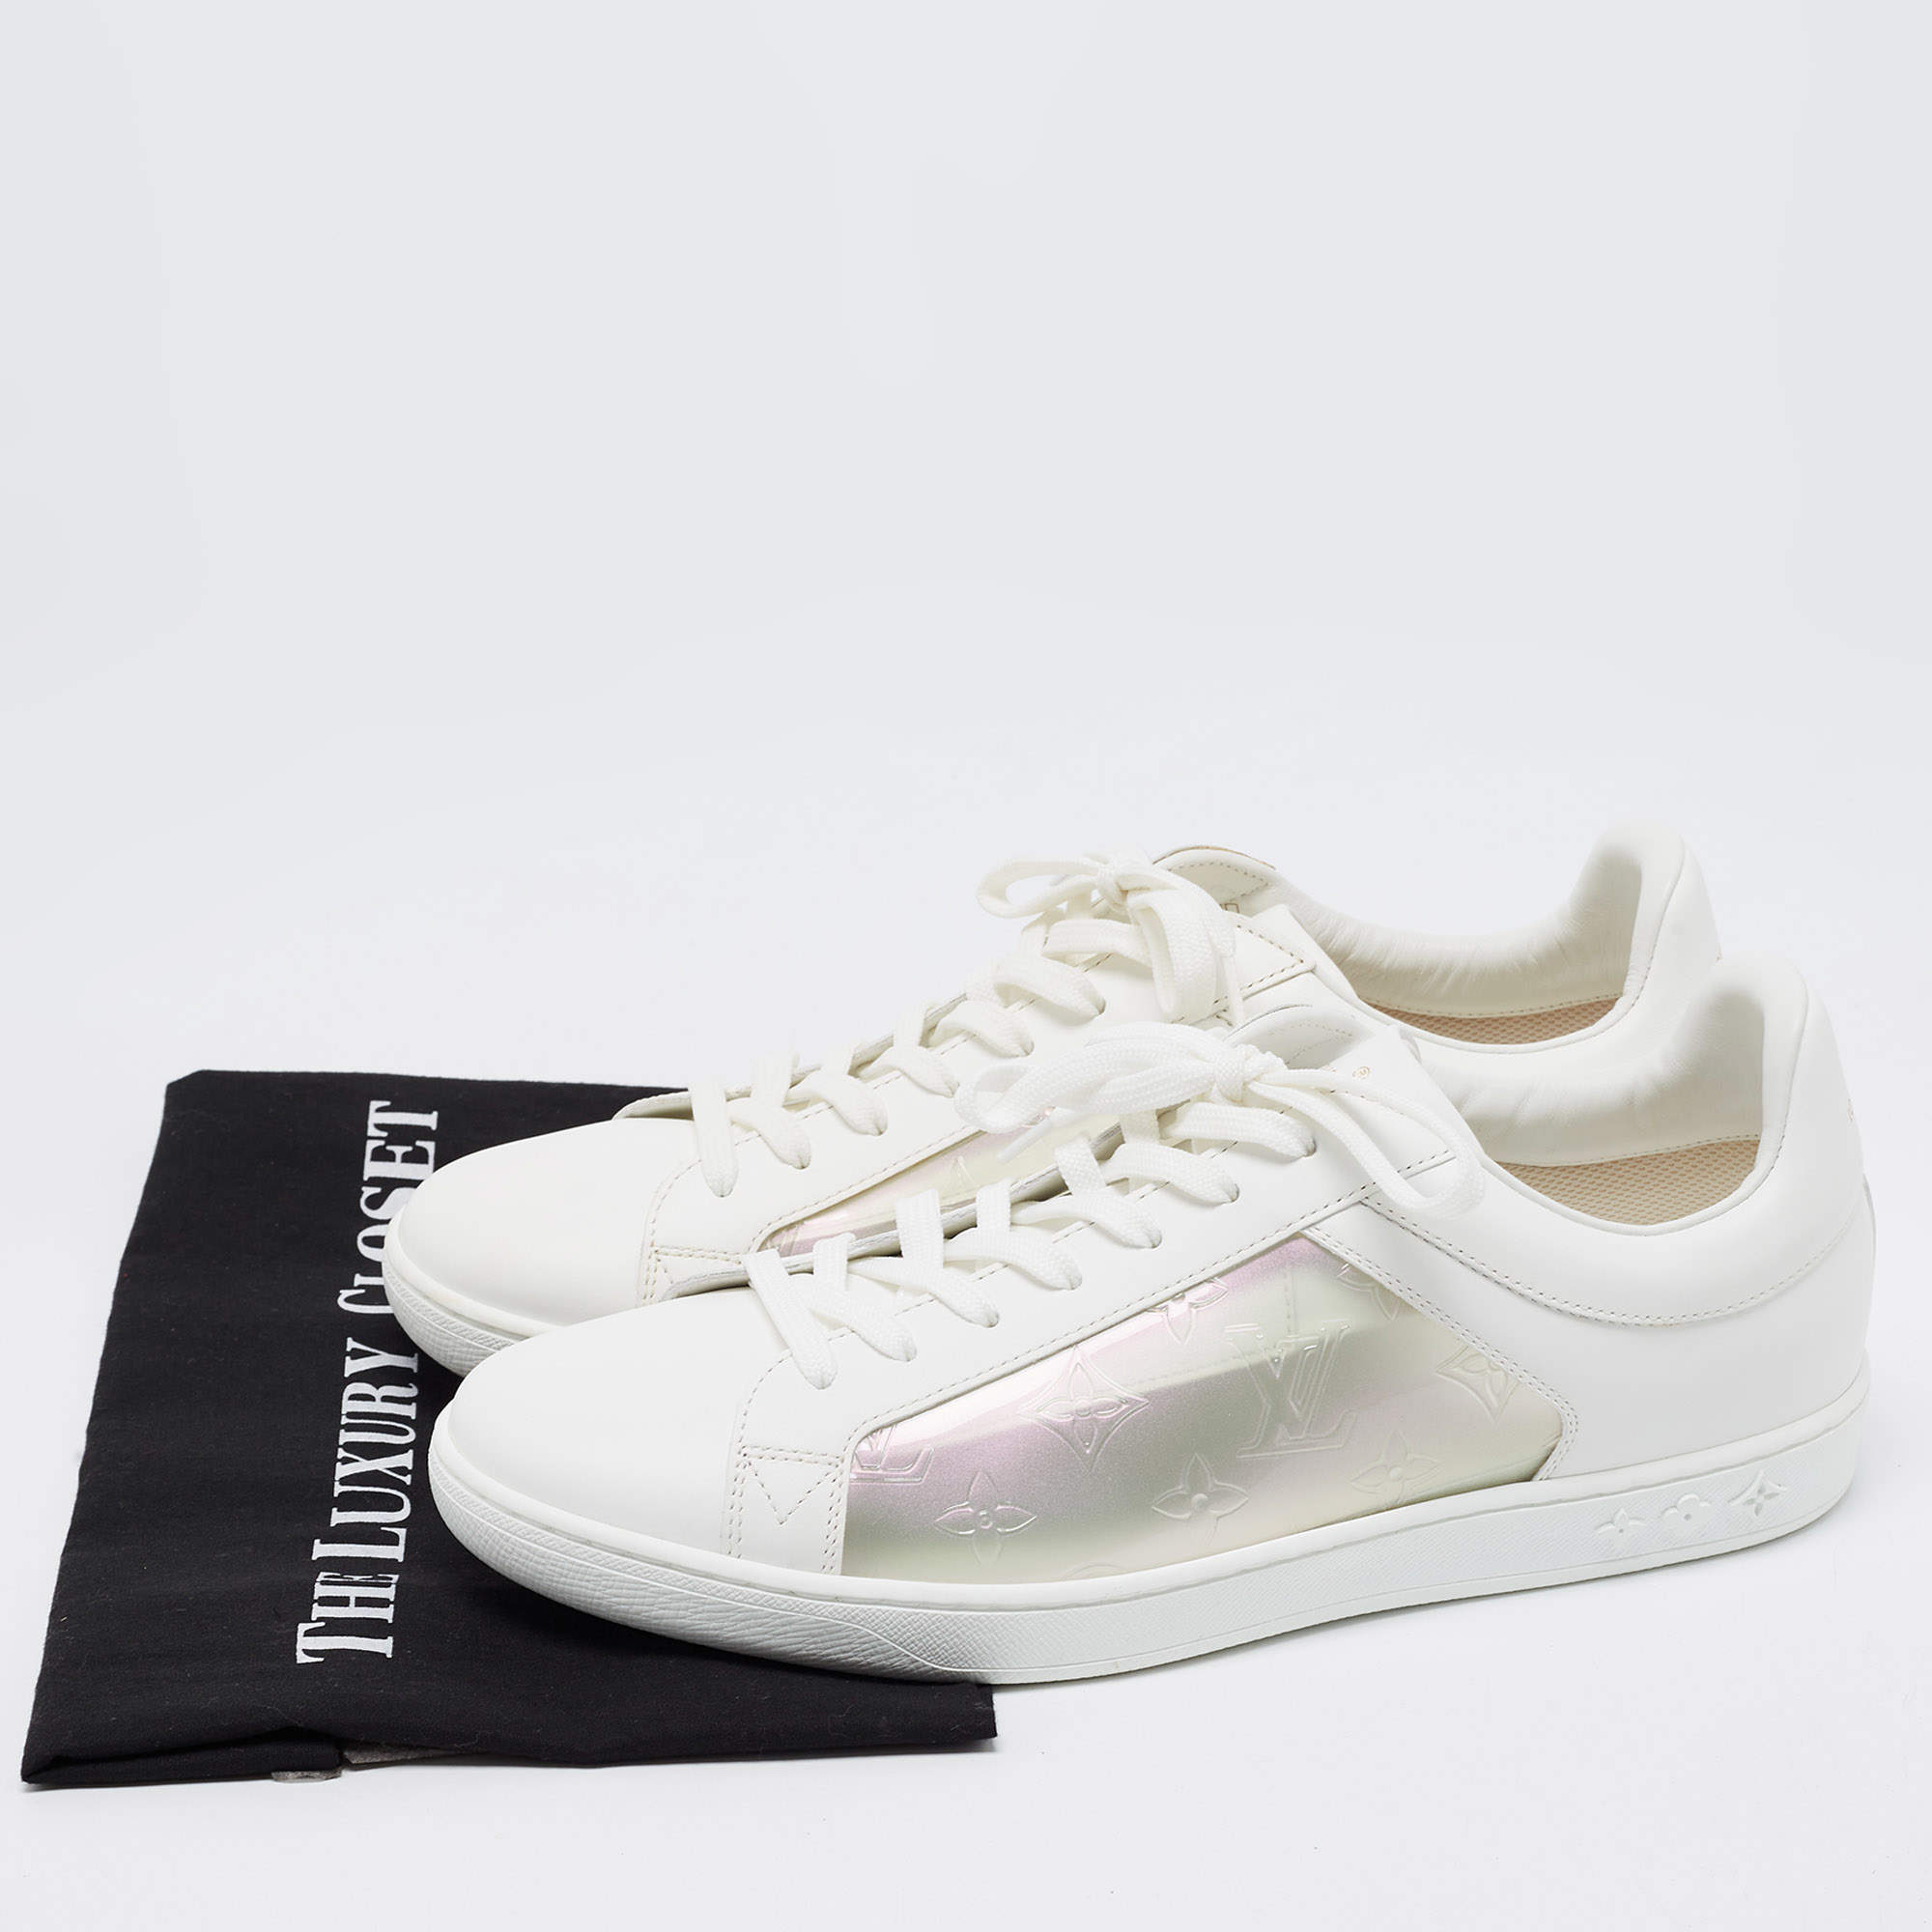 Louis Vuitton Iridescent Luxembourg Sneaker Size LV 9.5